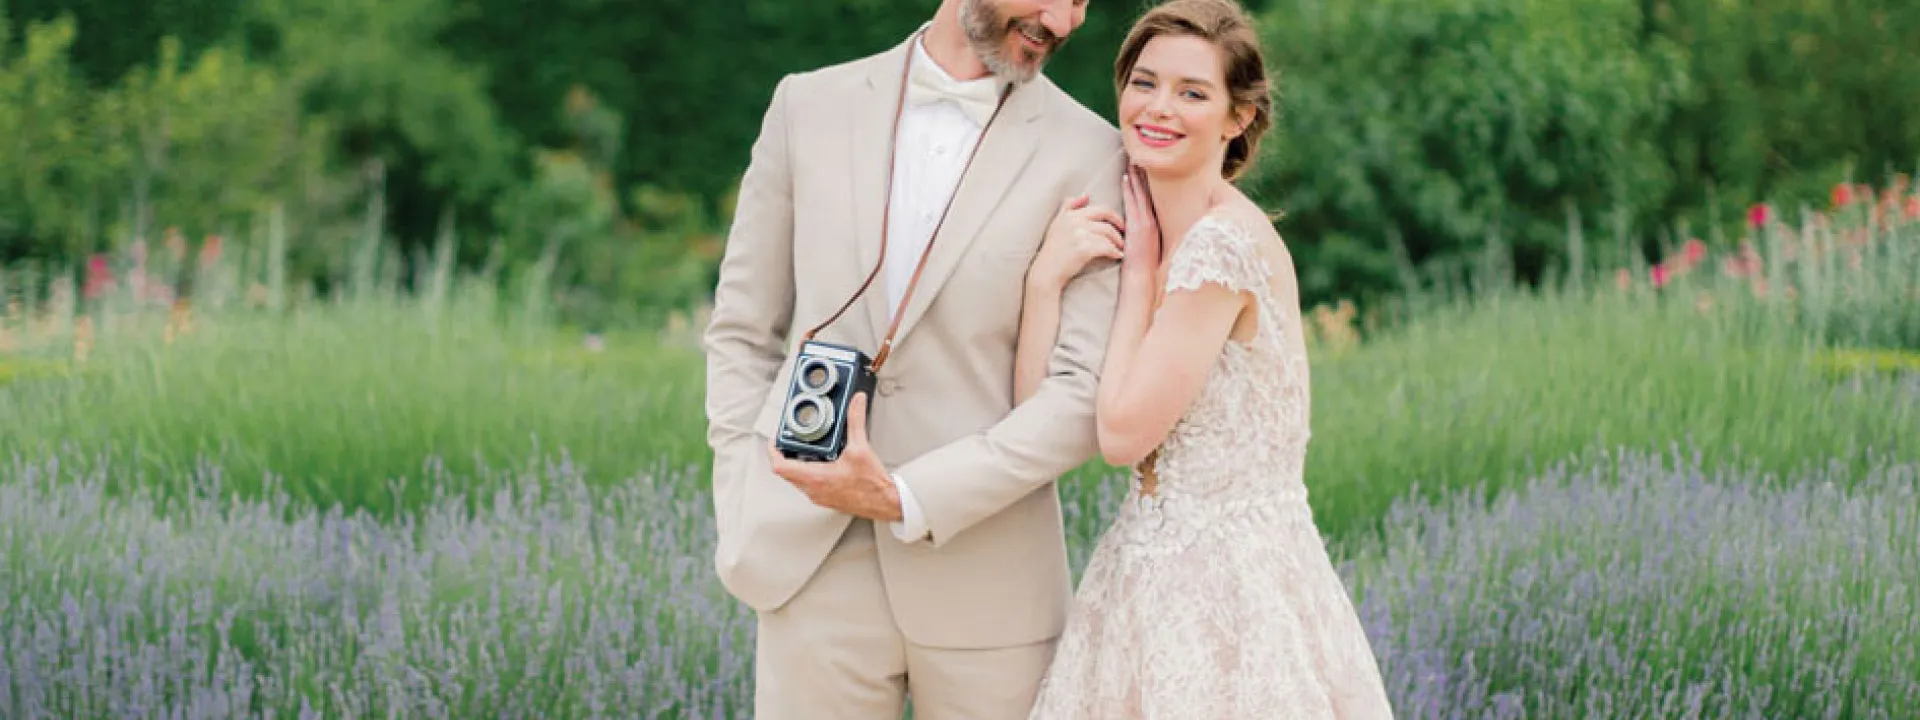 Wheat and Honey Events pulled together the dreamiest of designs in this styled shoot